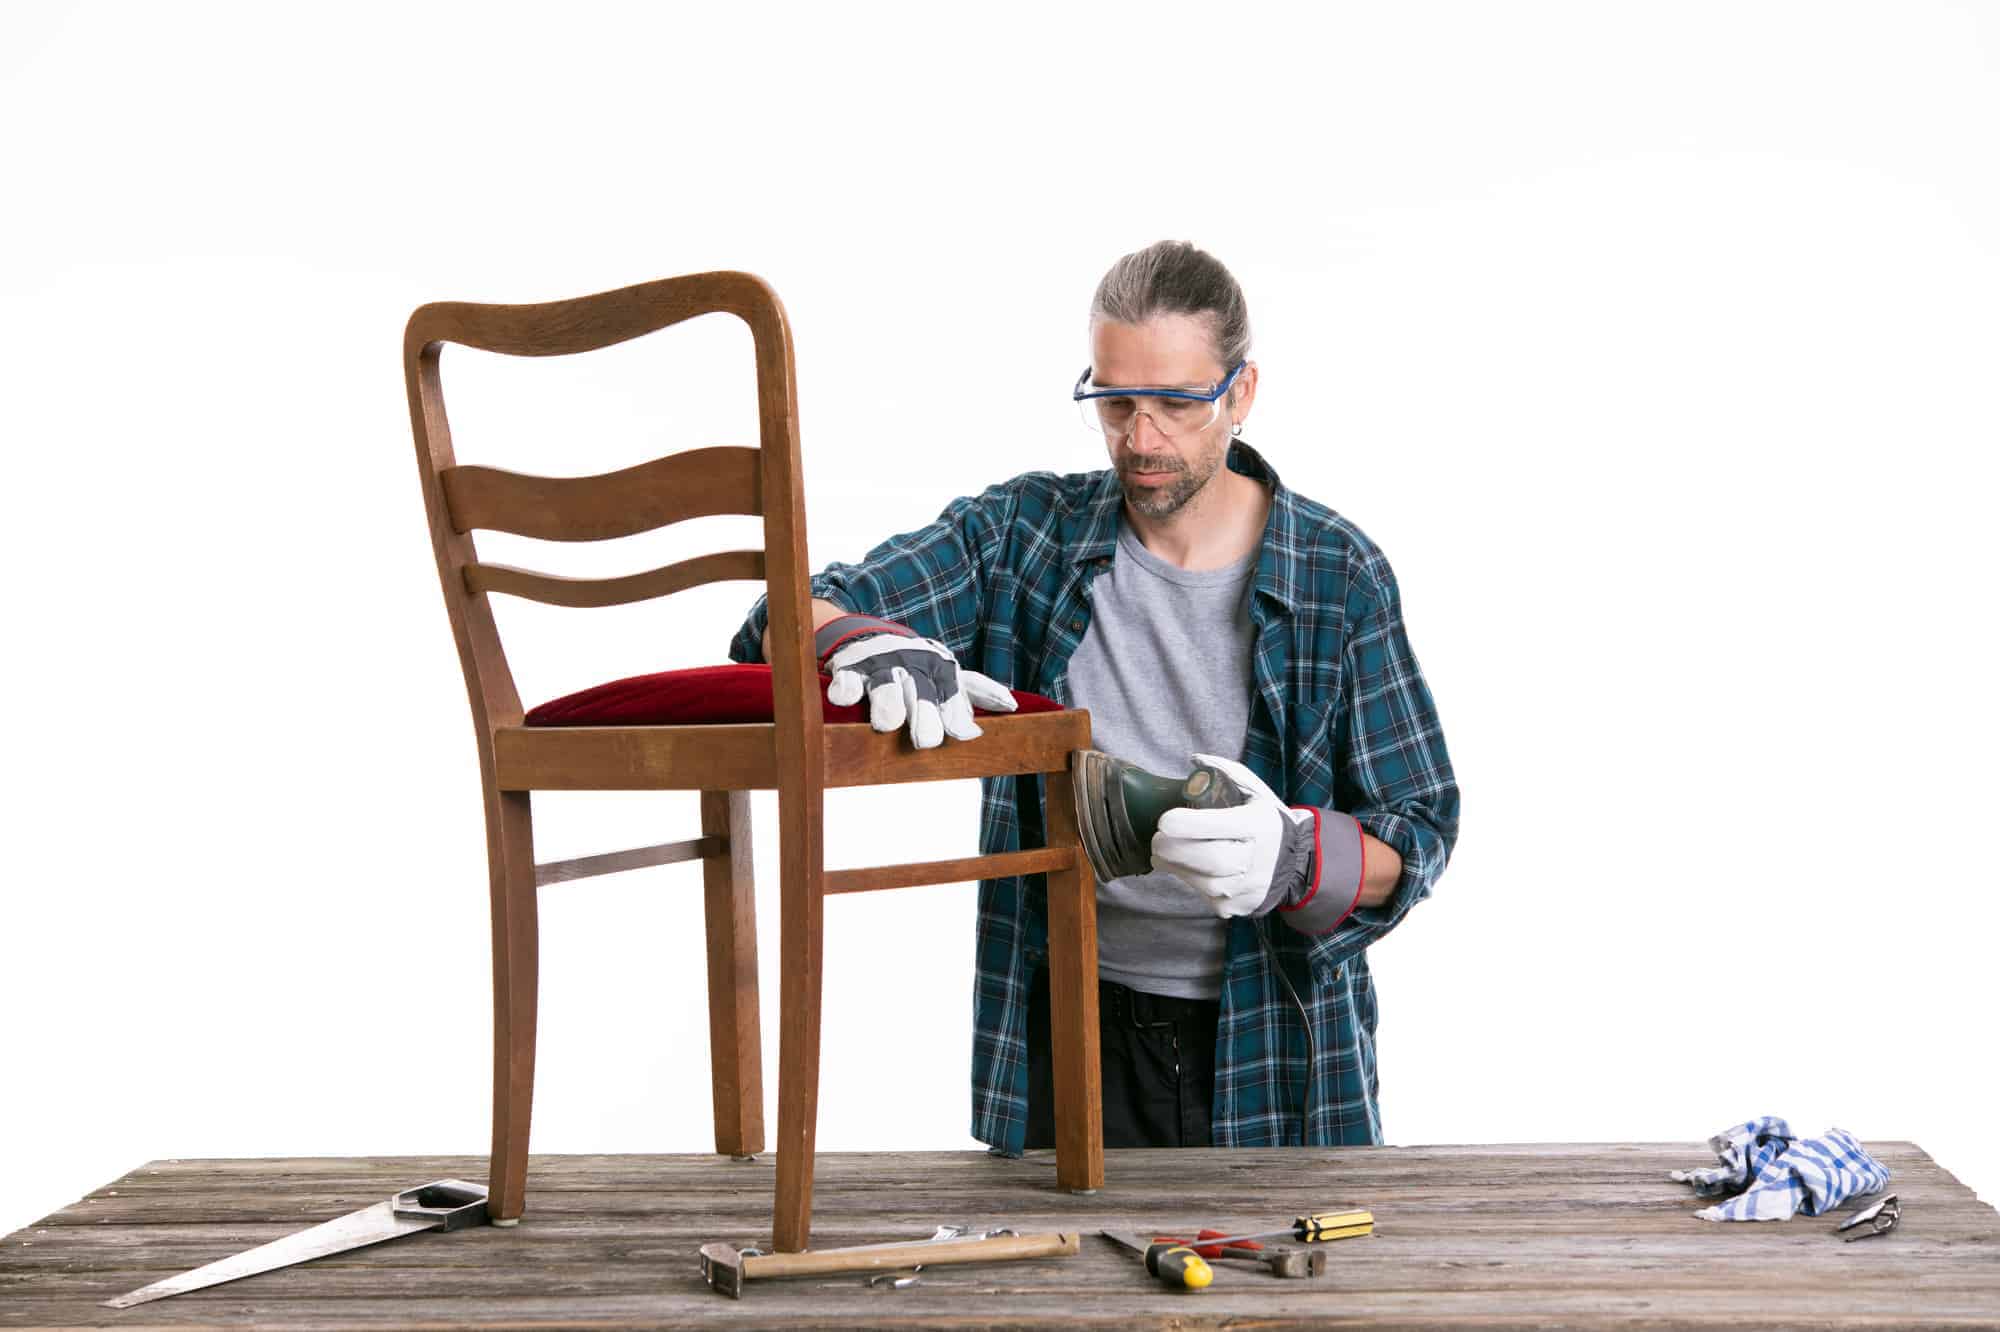 sanding a chair with mouse sander